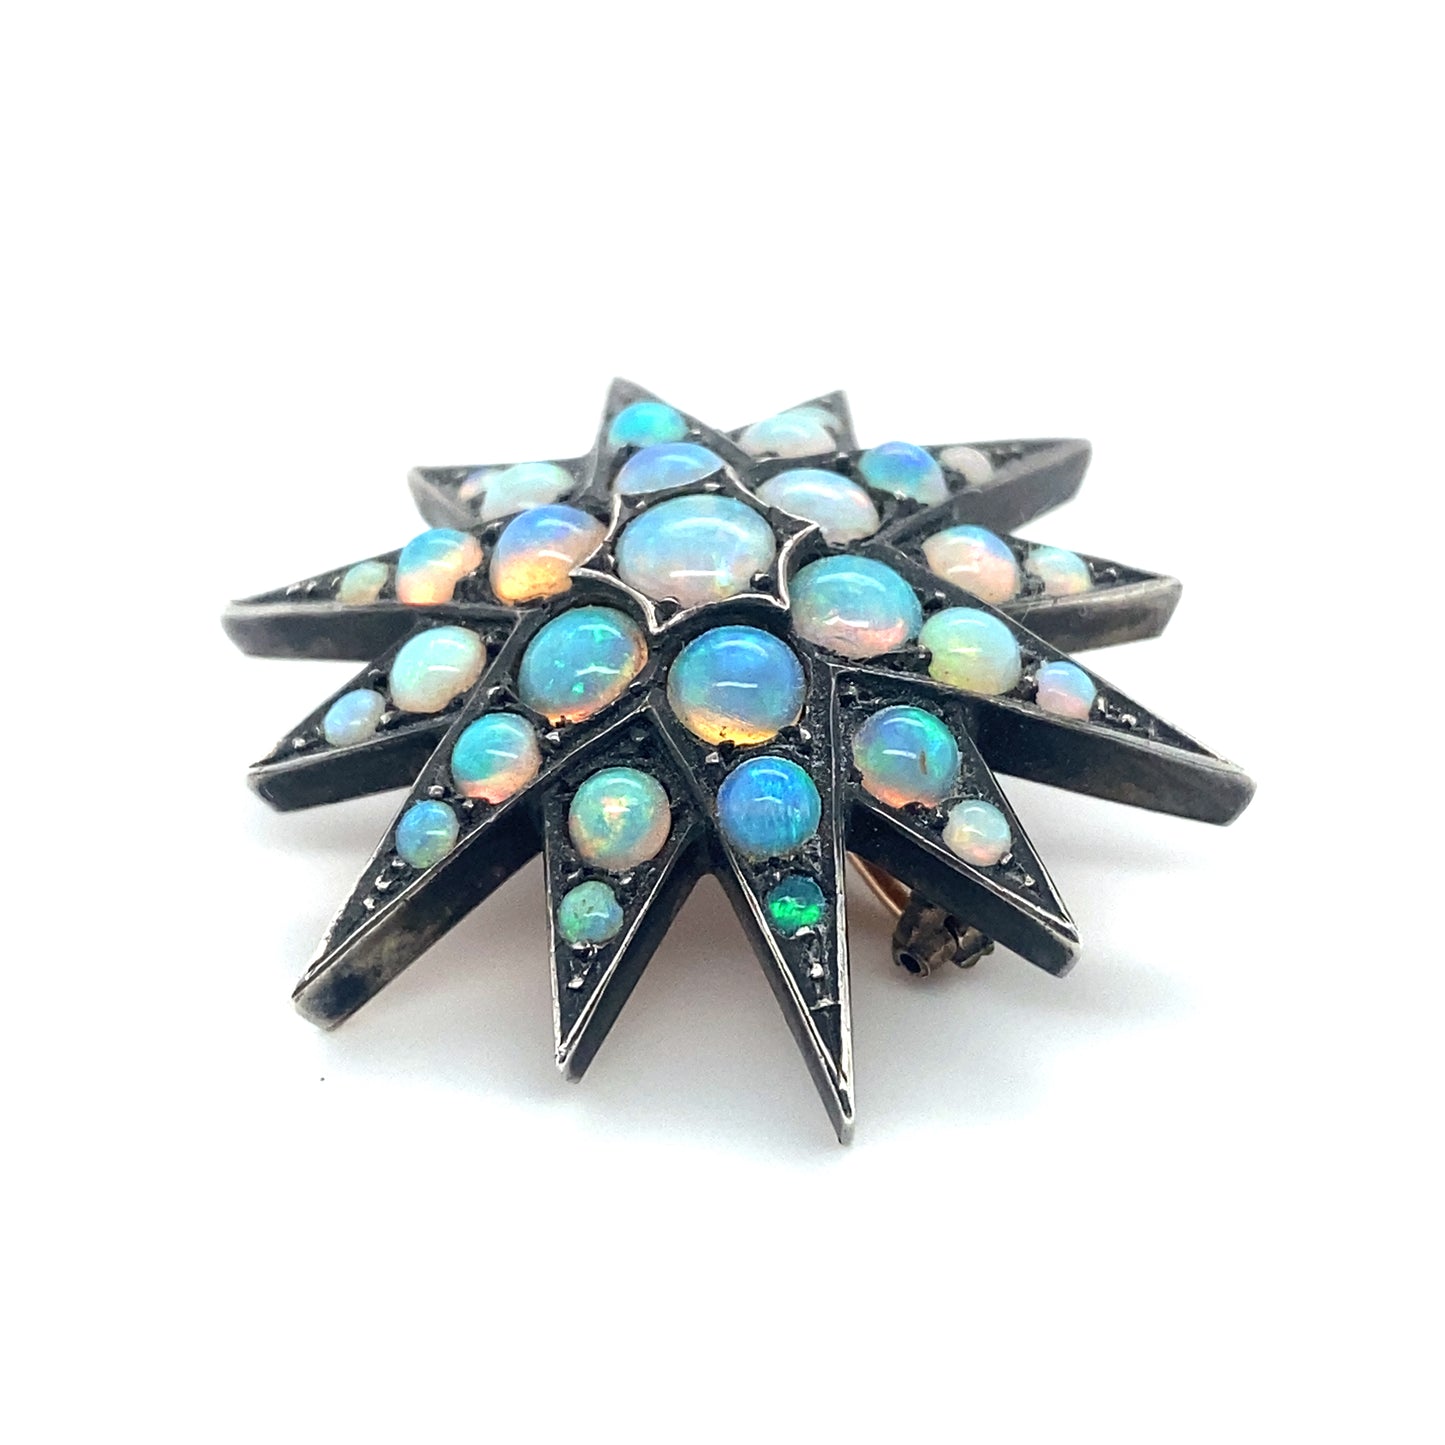 Circa 1880s Victorian Opal Starburst Brooch in Silver and Rose Gold